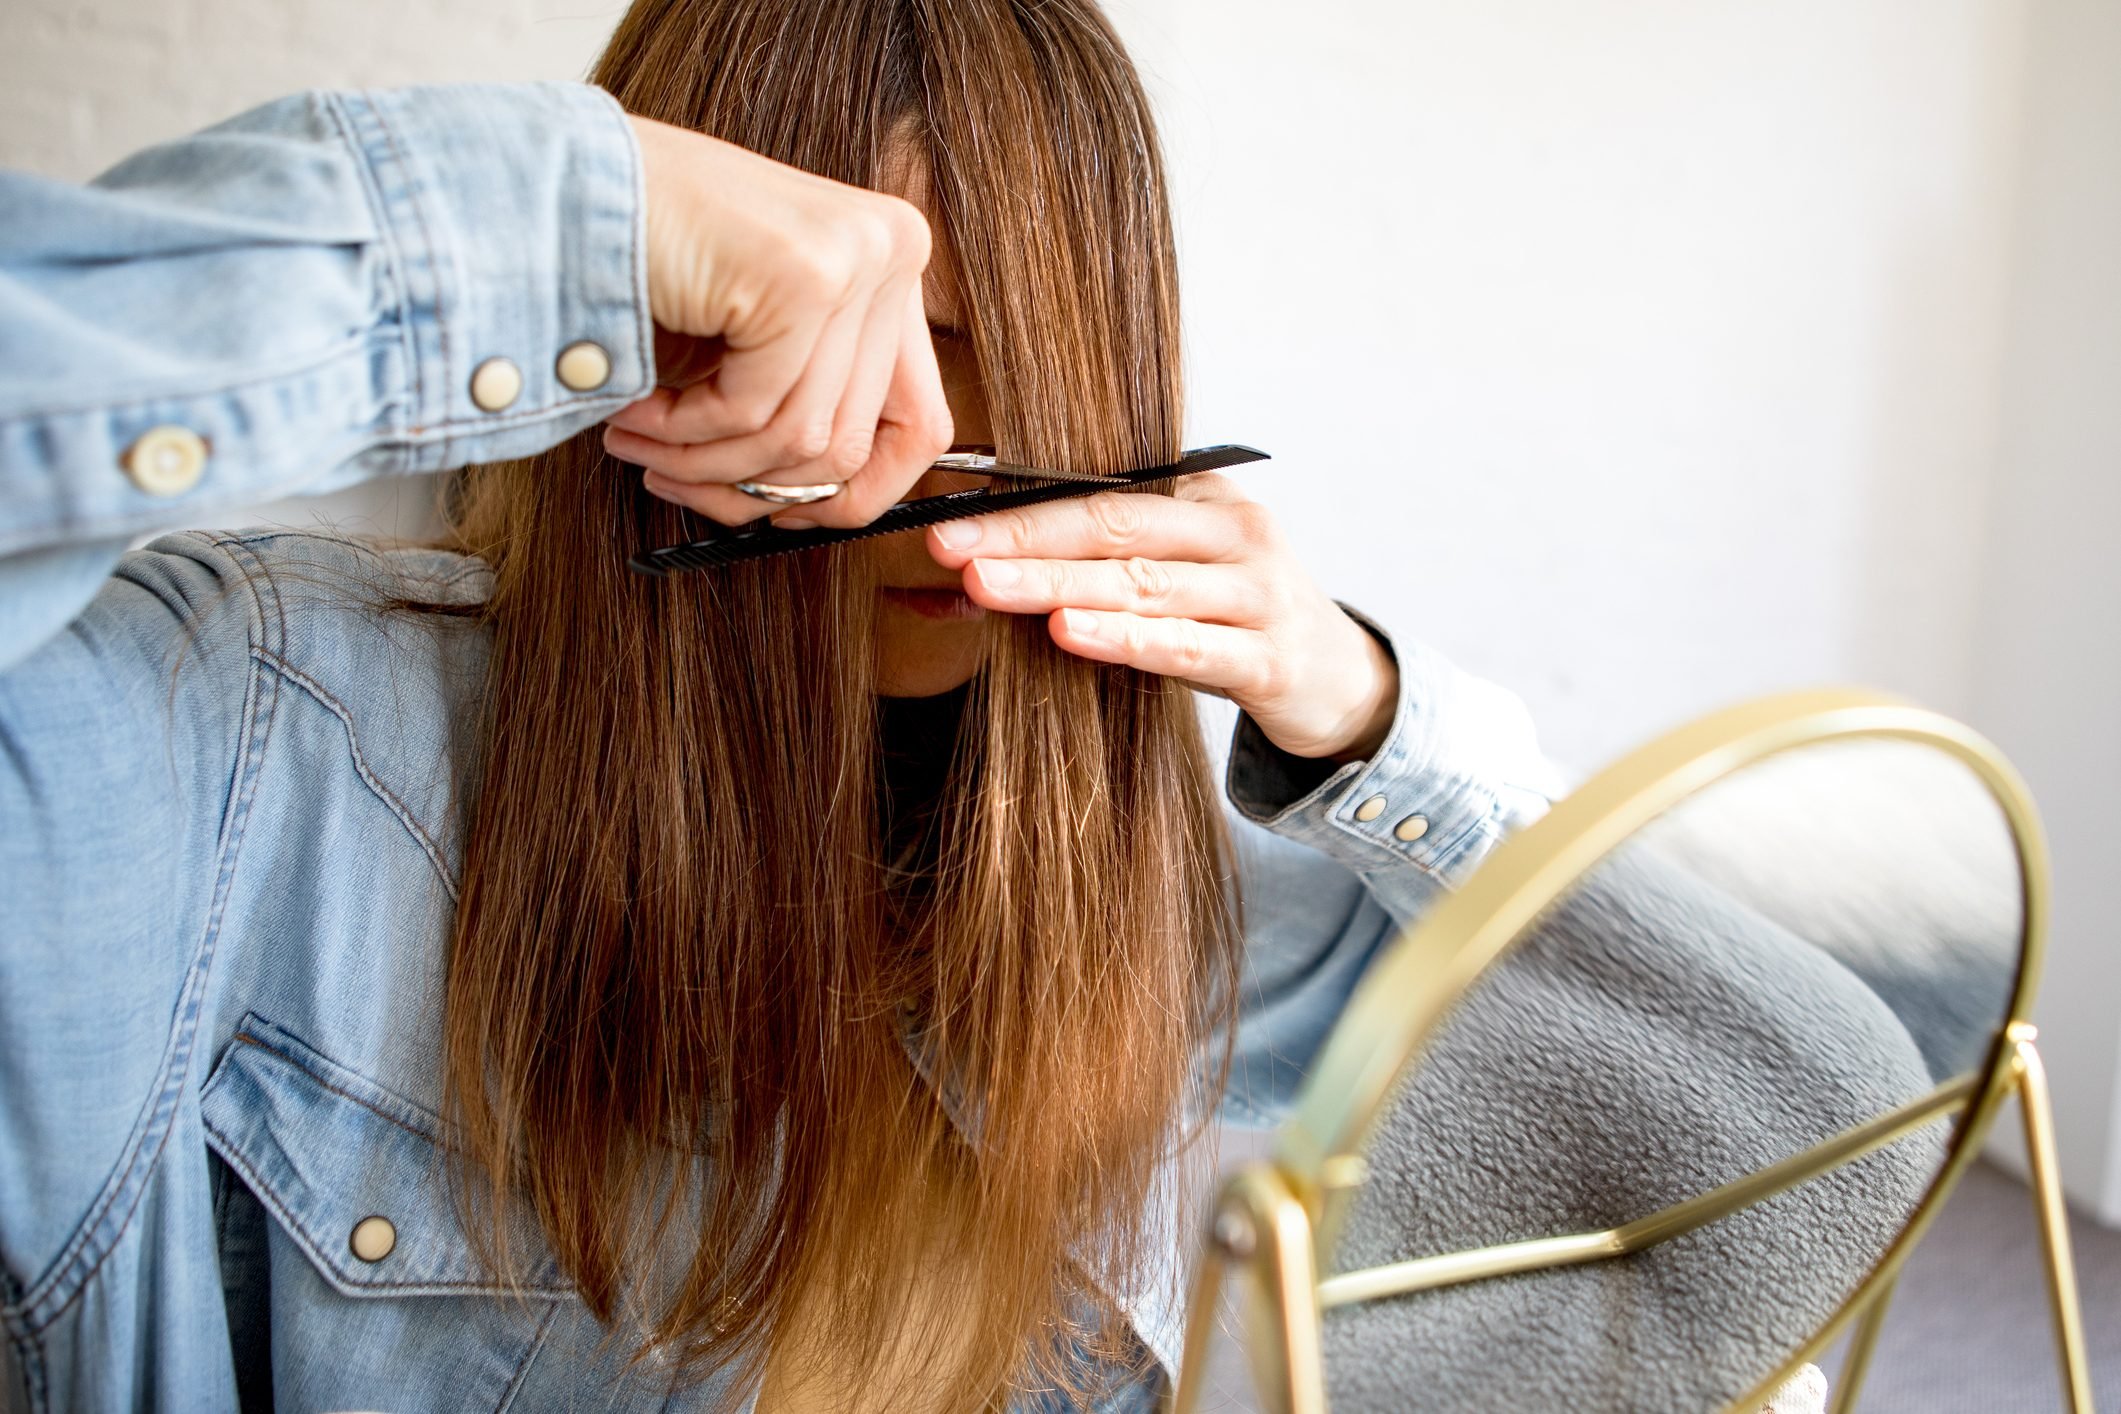 9 Things You're Doing to Your Hair That a Stylist Wouldn't | Reader's Digest